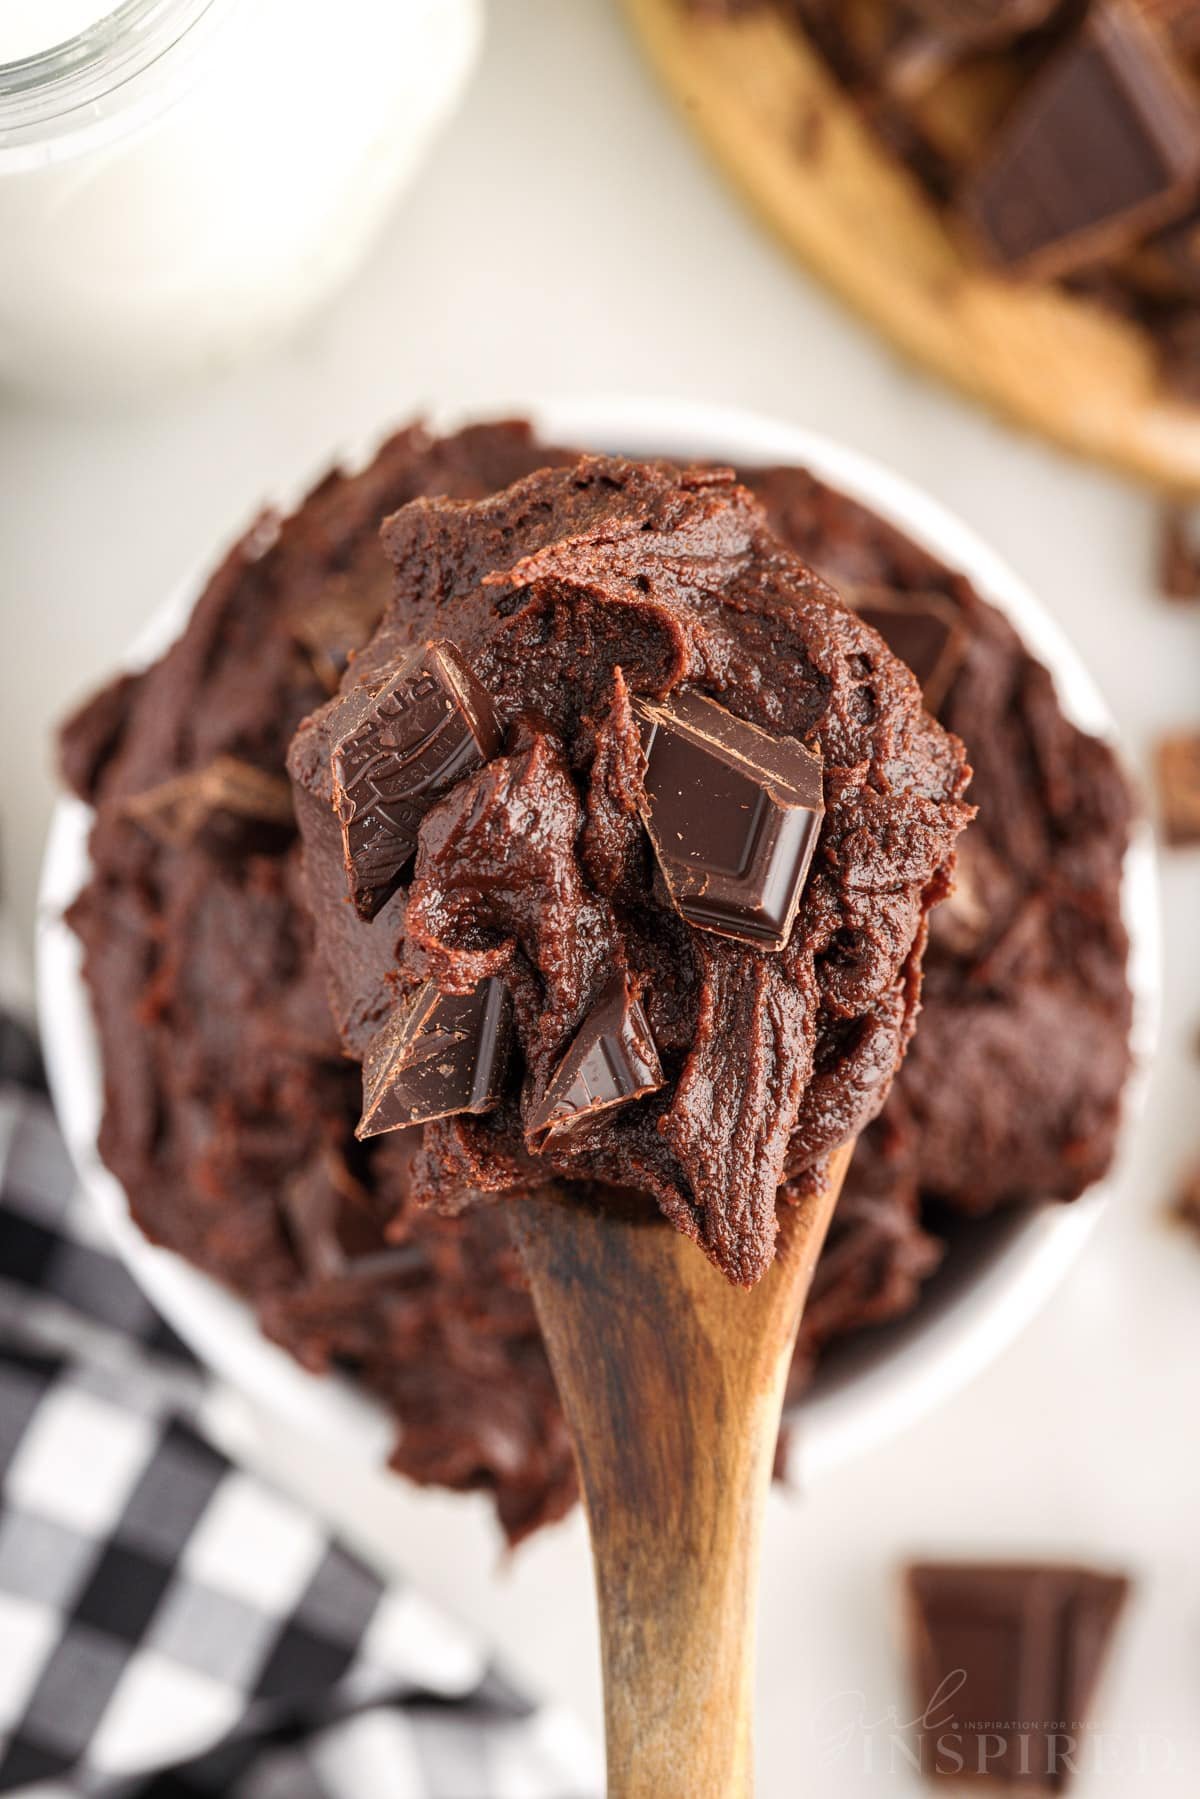 A wooden spoonful of Edible Brownie Batter over a serving bowl of it.